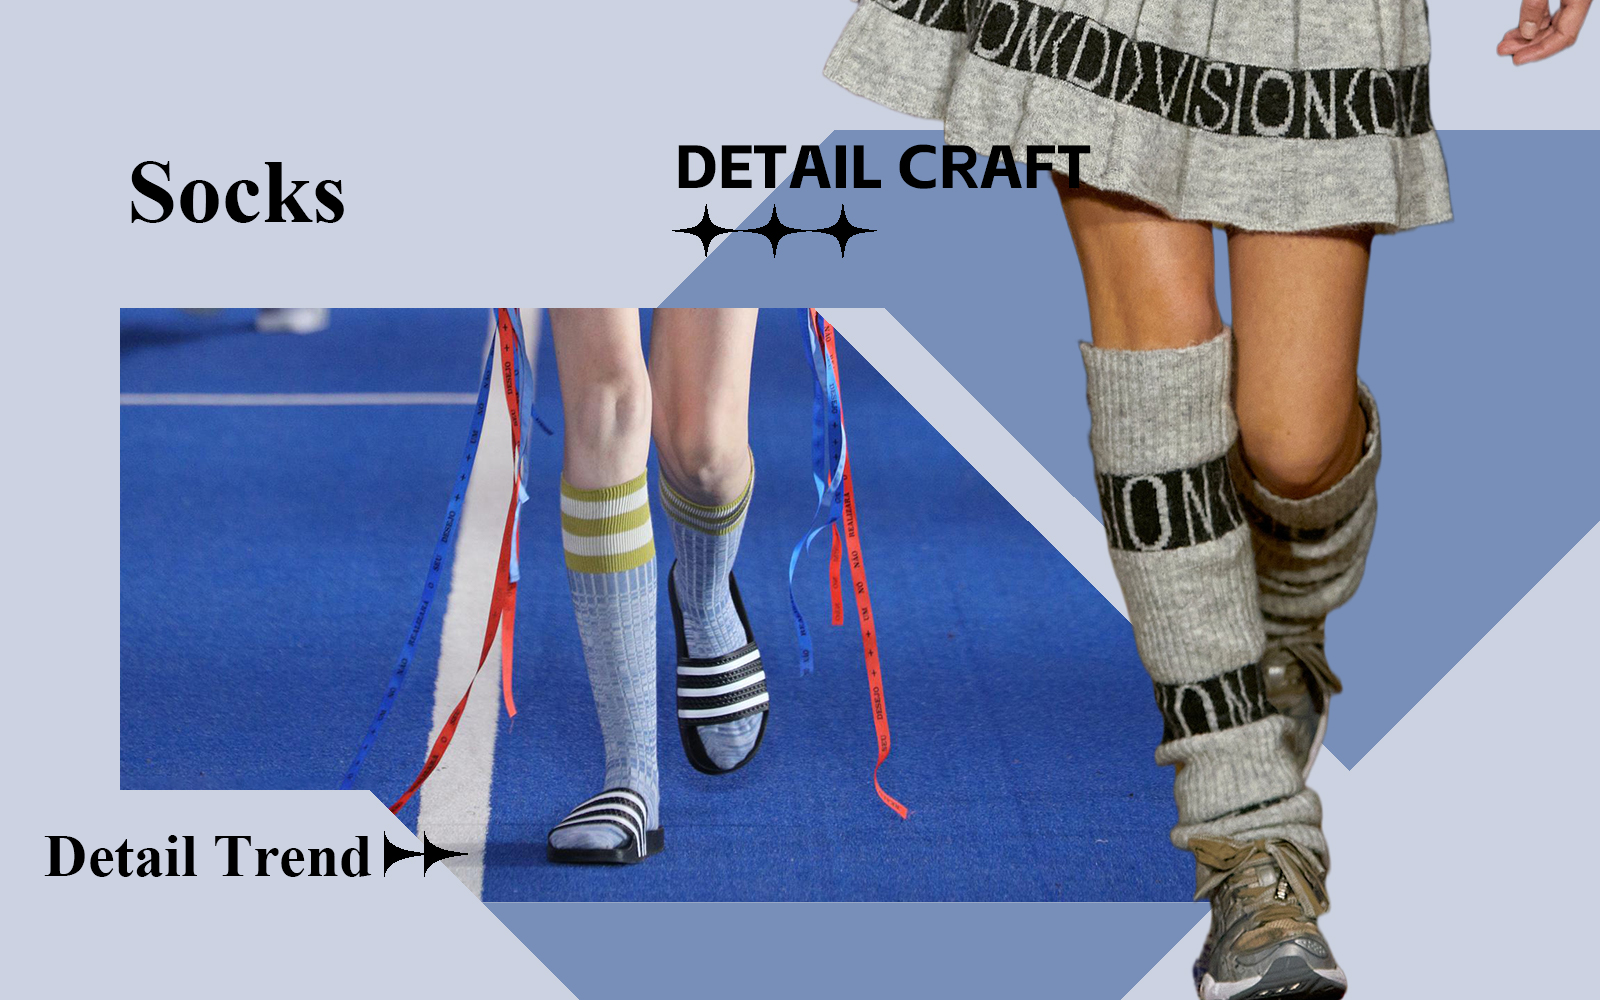 Smart Casual -- The Detail & Craft Trend for Socks